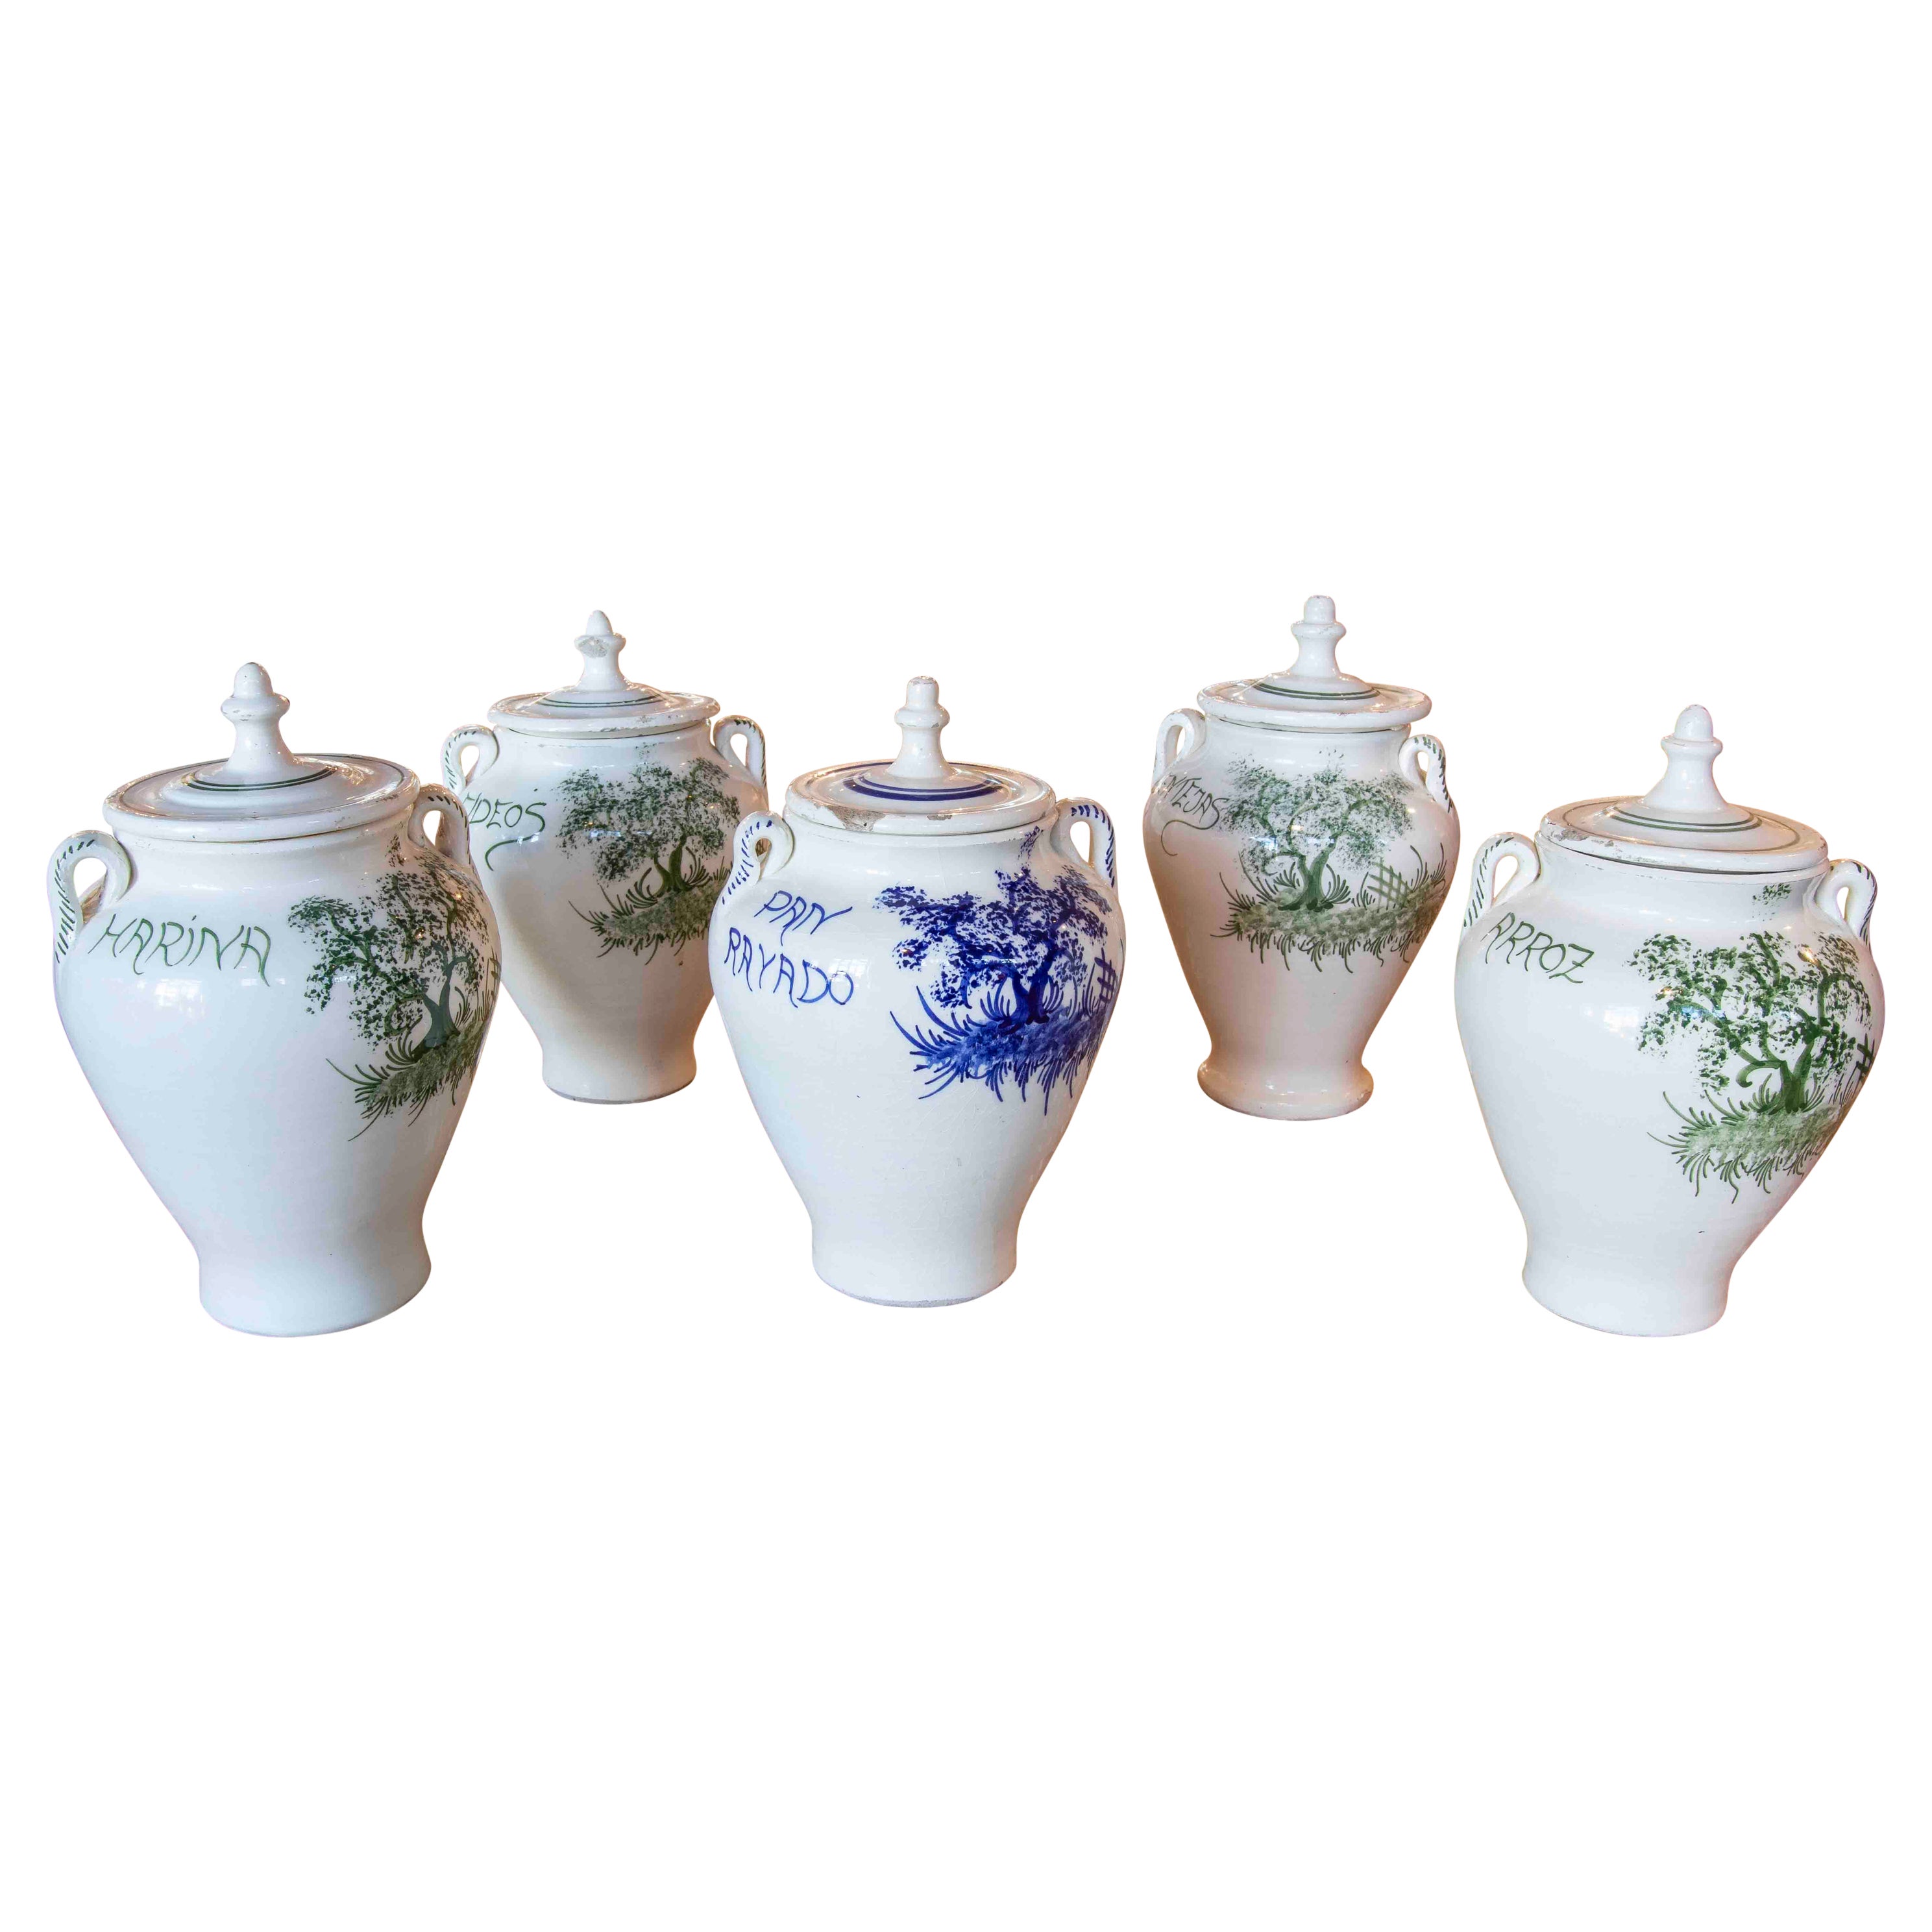 Set of Five Glazed Ceramic Food Jars with Lids for Cooking For Sale